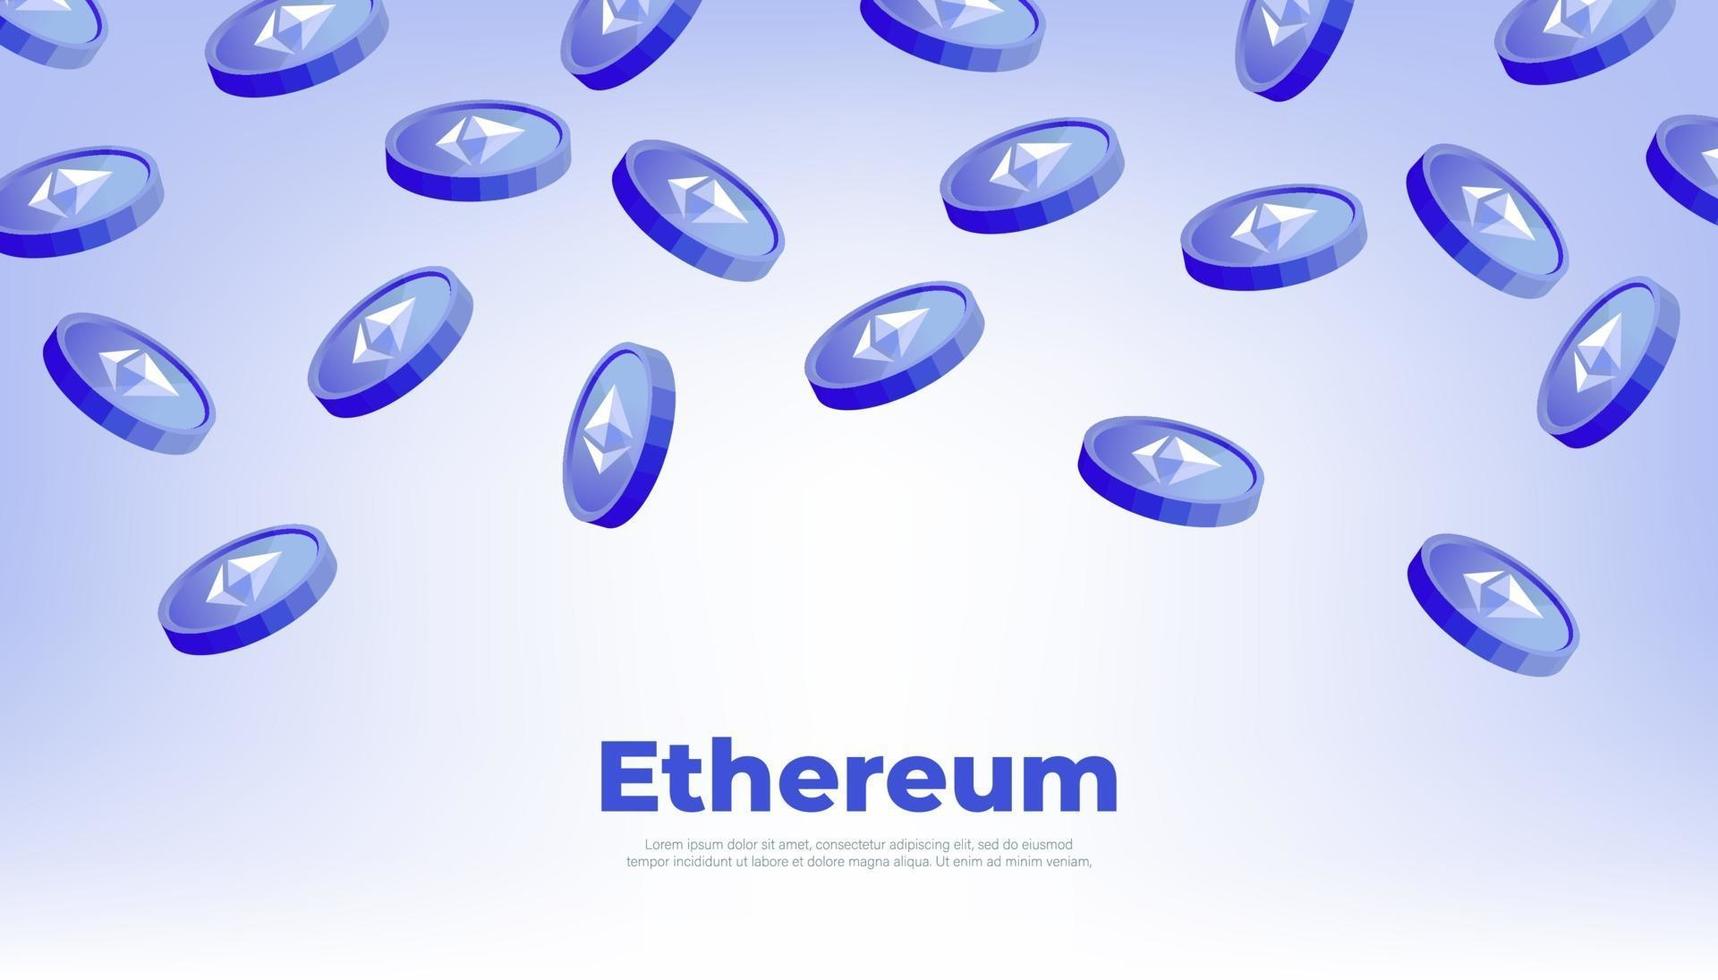 Ethereum Coins Falling From The Sky Eth Cryptocurrency Banner Vector